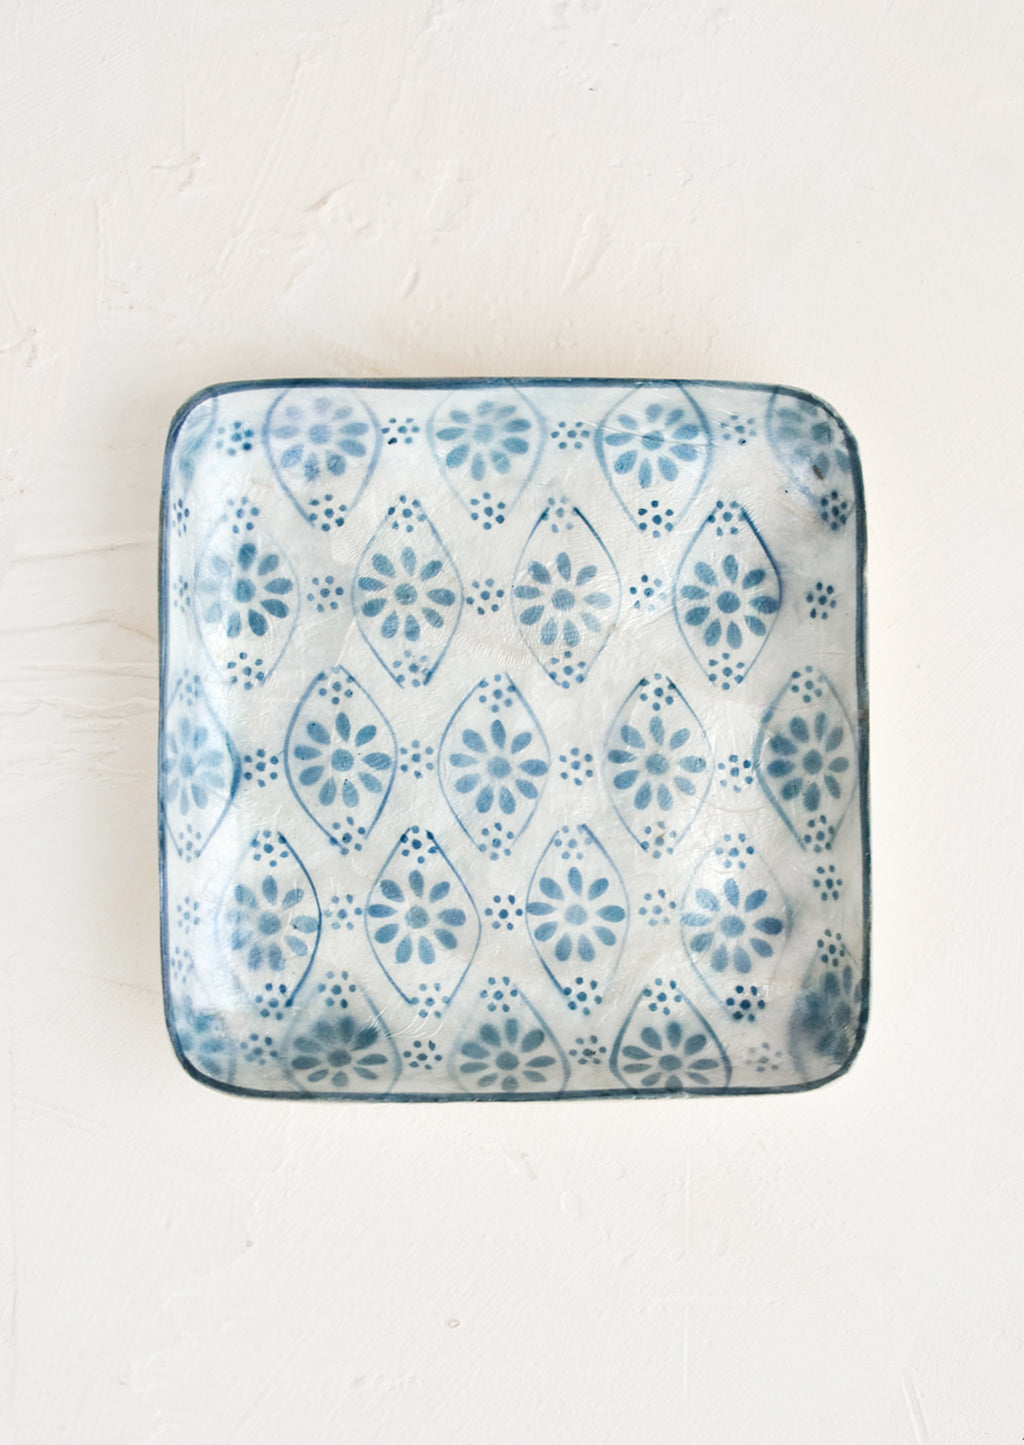 Floral Motif: A small square catchall tray in indigo motif.